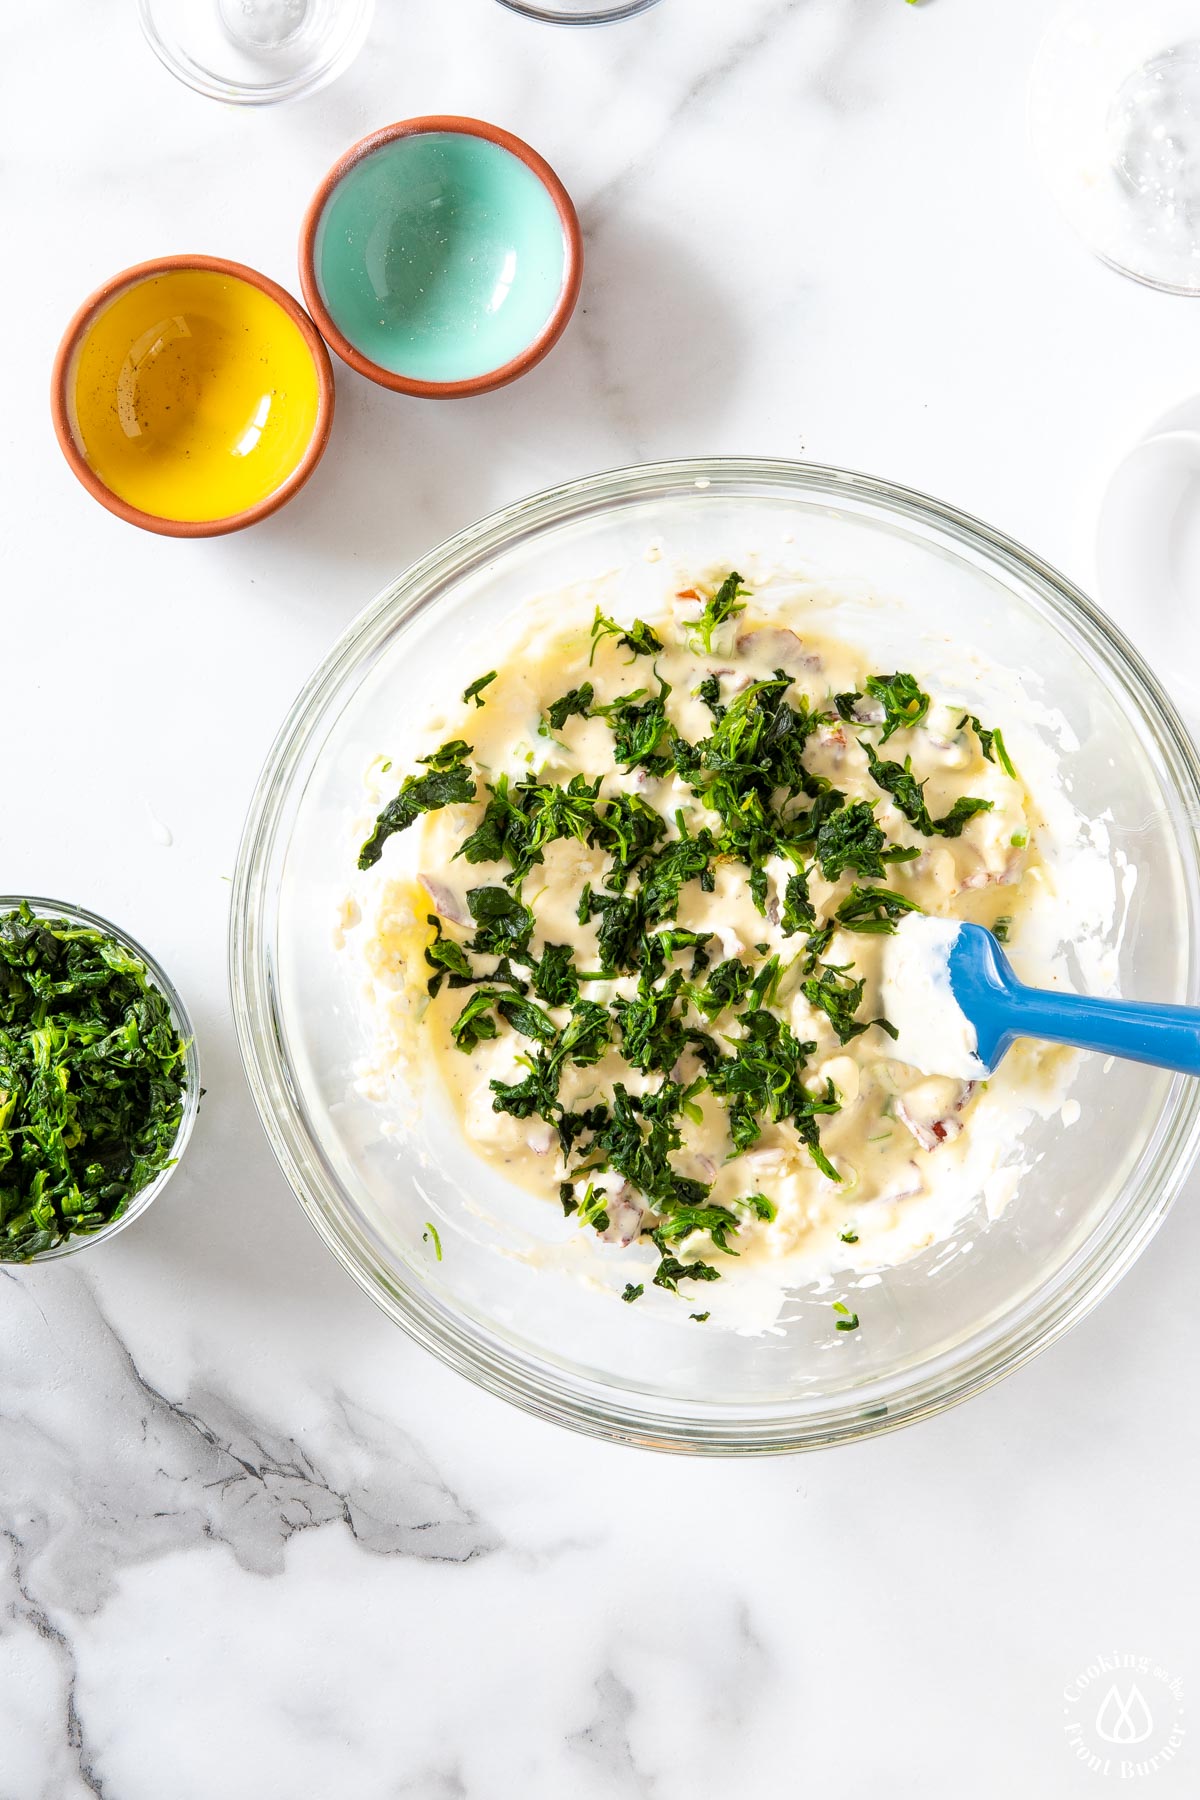 creamy feta cheese mixture and adding cooked spinach